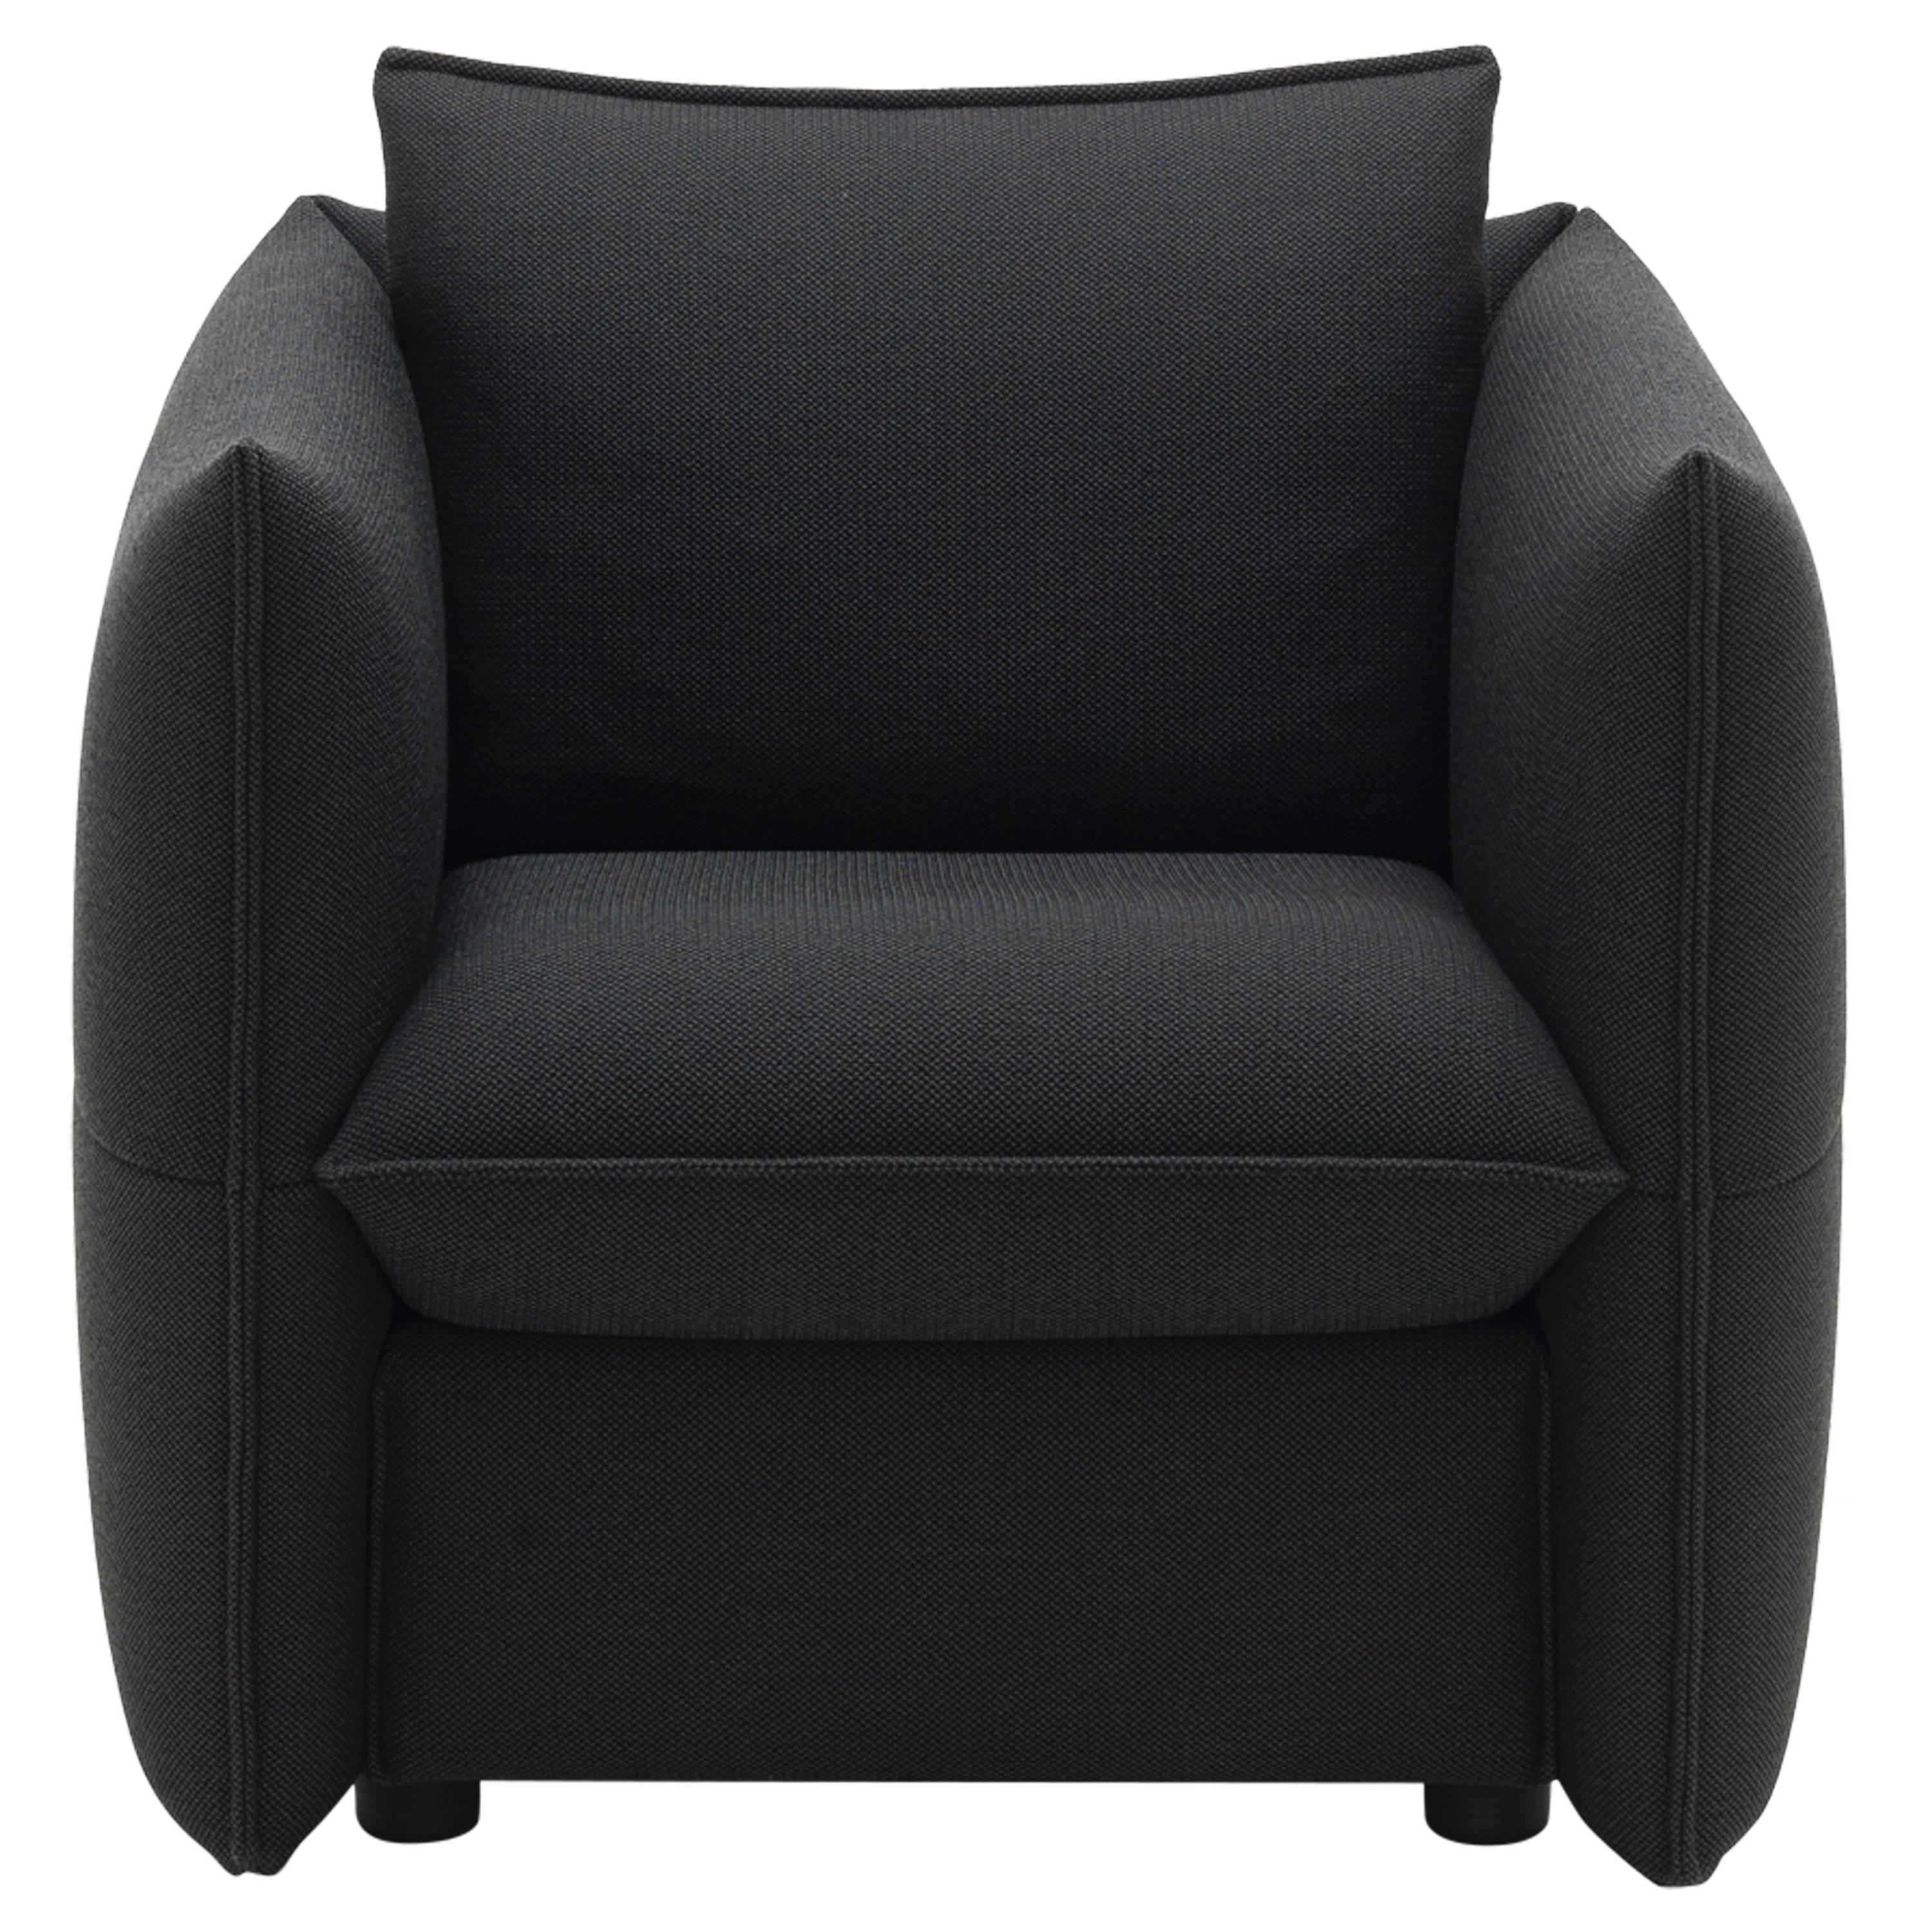 Vitra Mariposa Club Armchair in Nero Plano by Edward Barber & Jay Osgerby For Sale